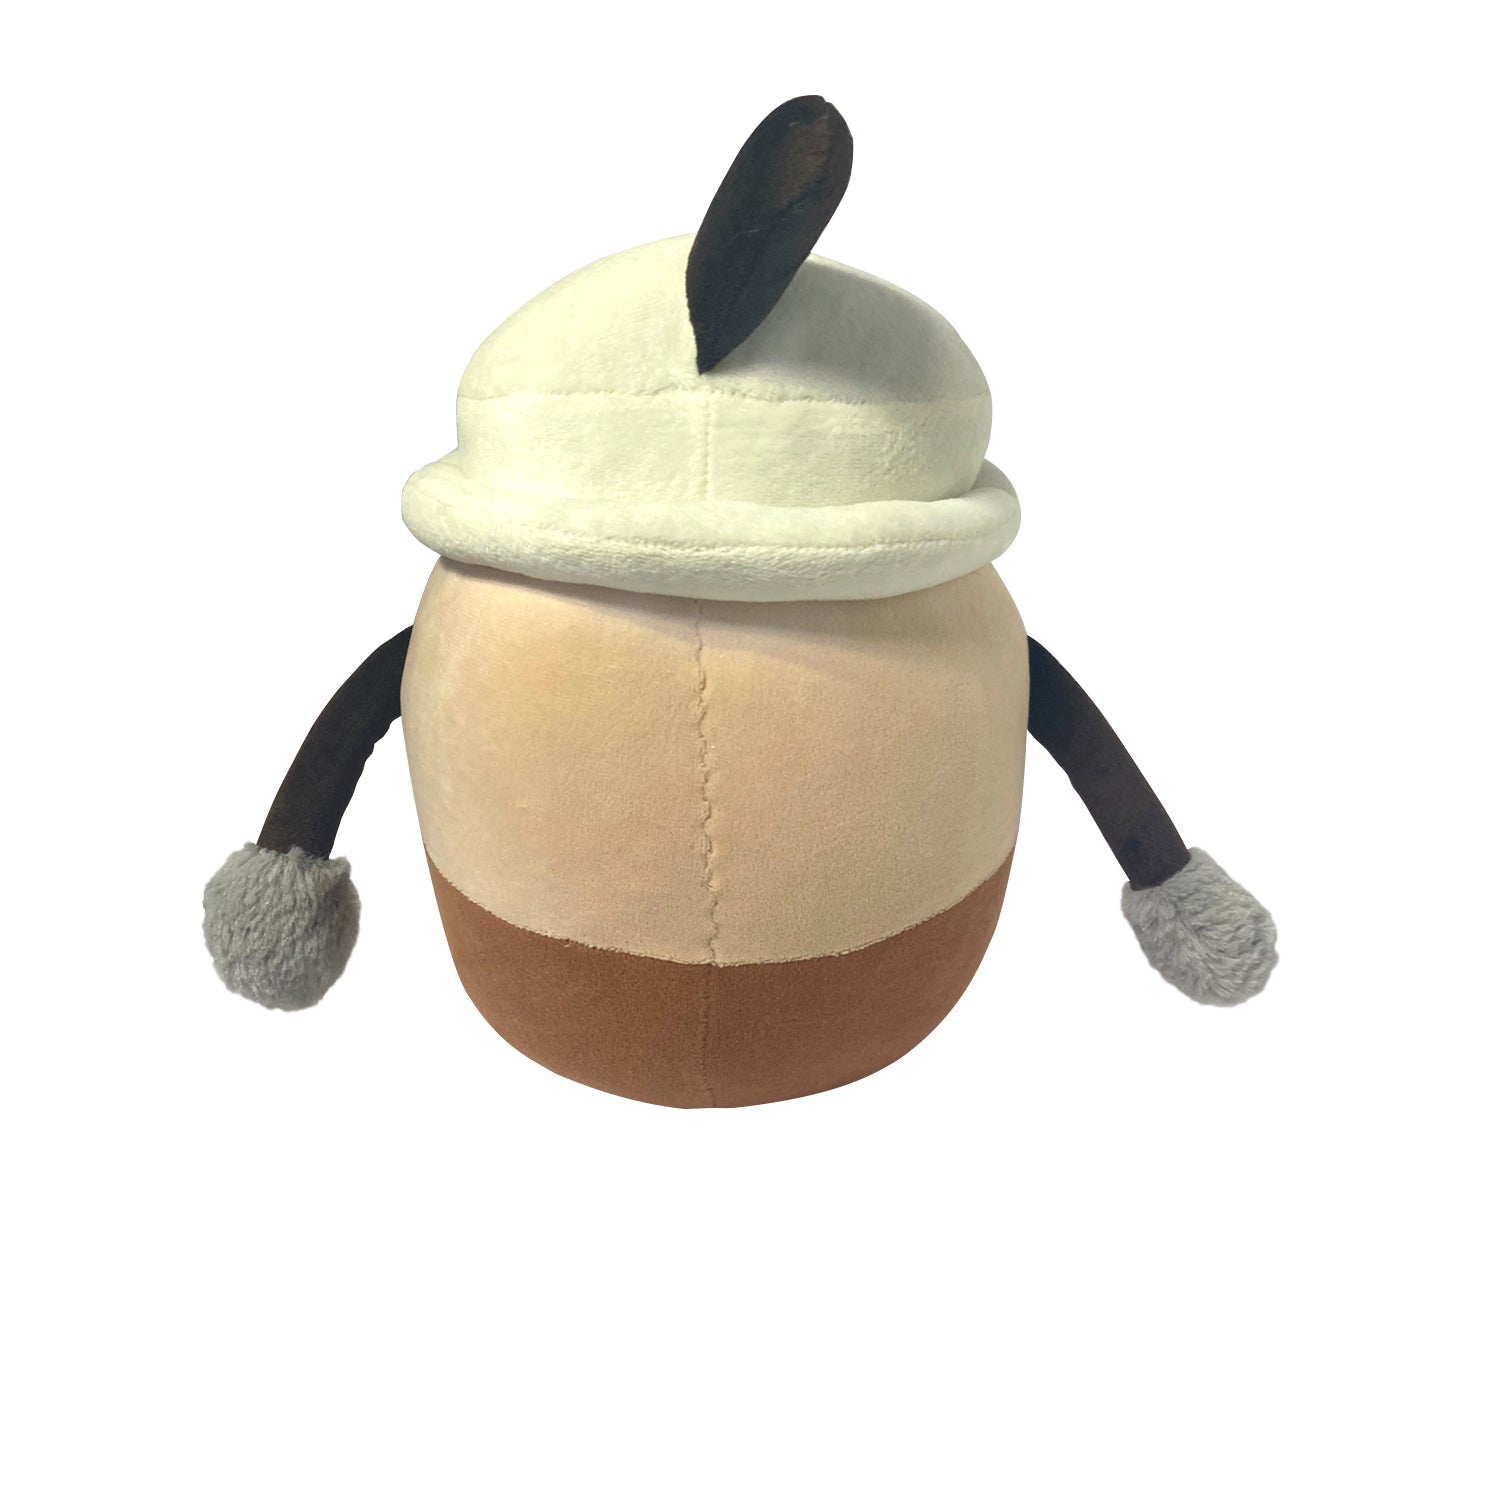 Roly Poly Cocobean Plush Toy Mumuso